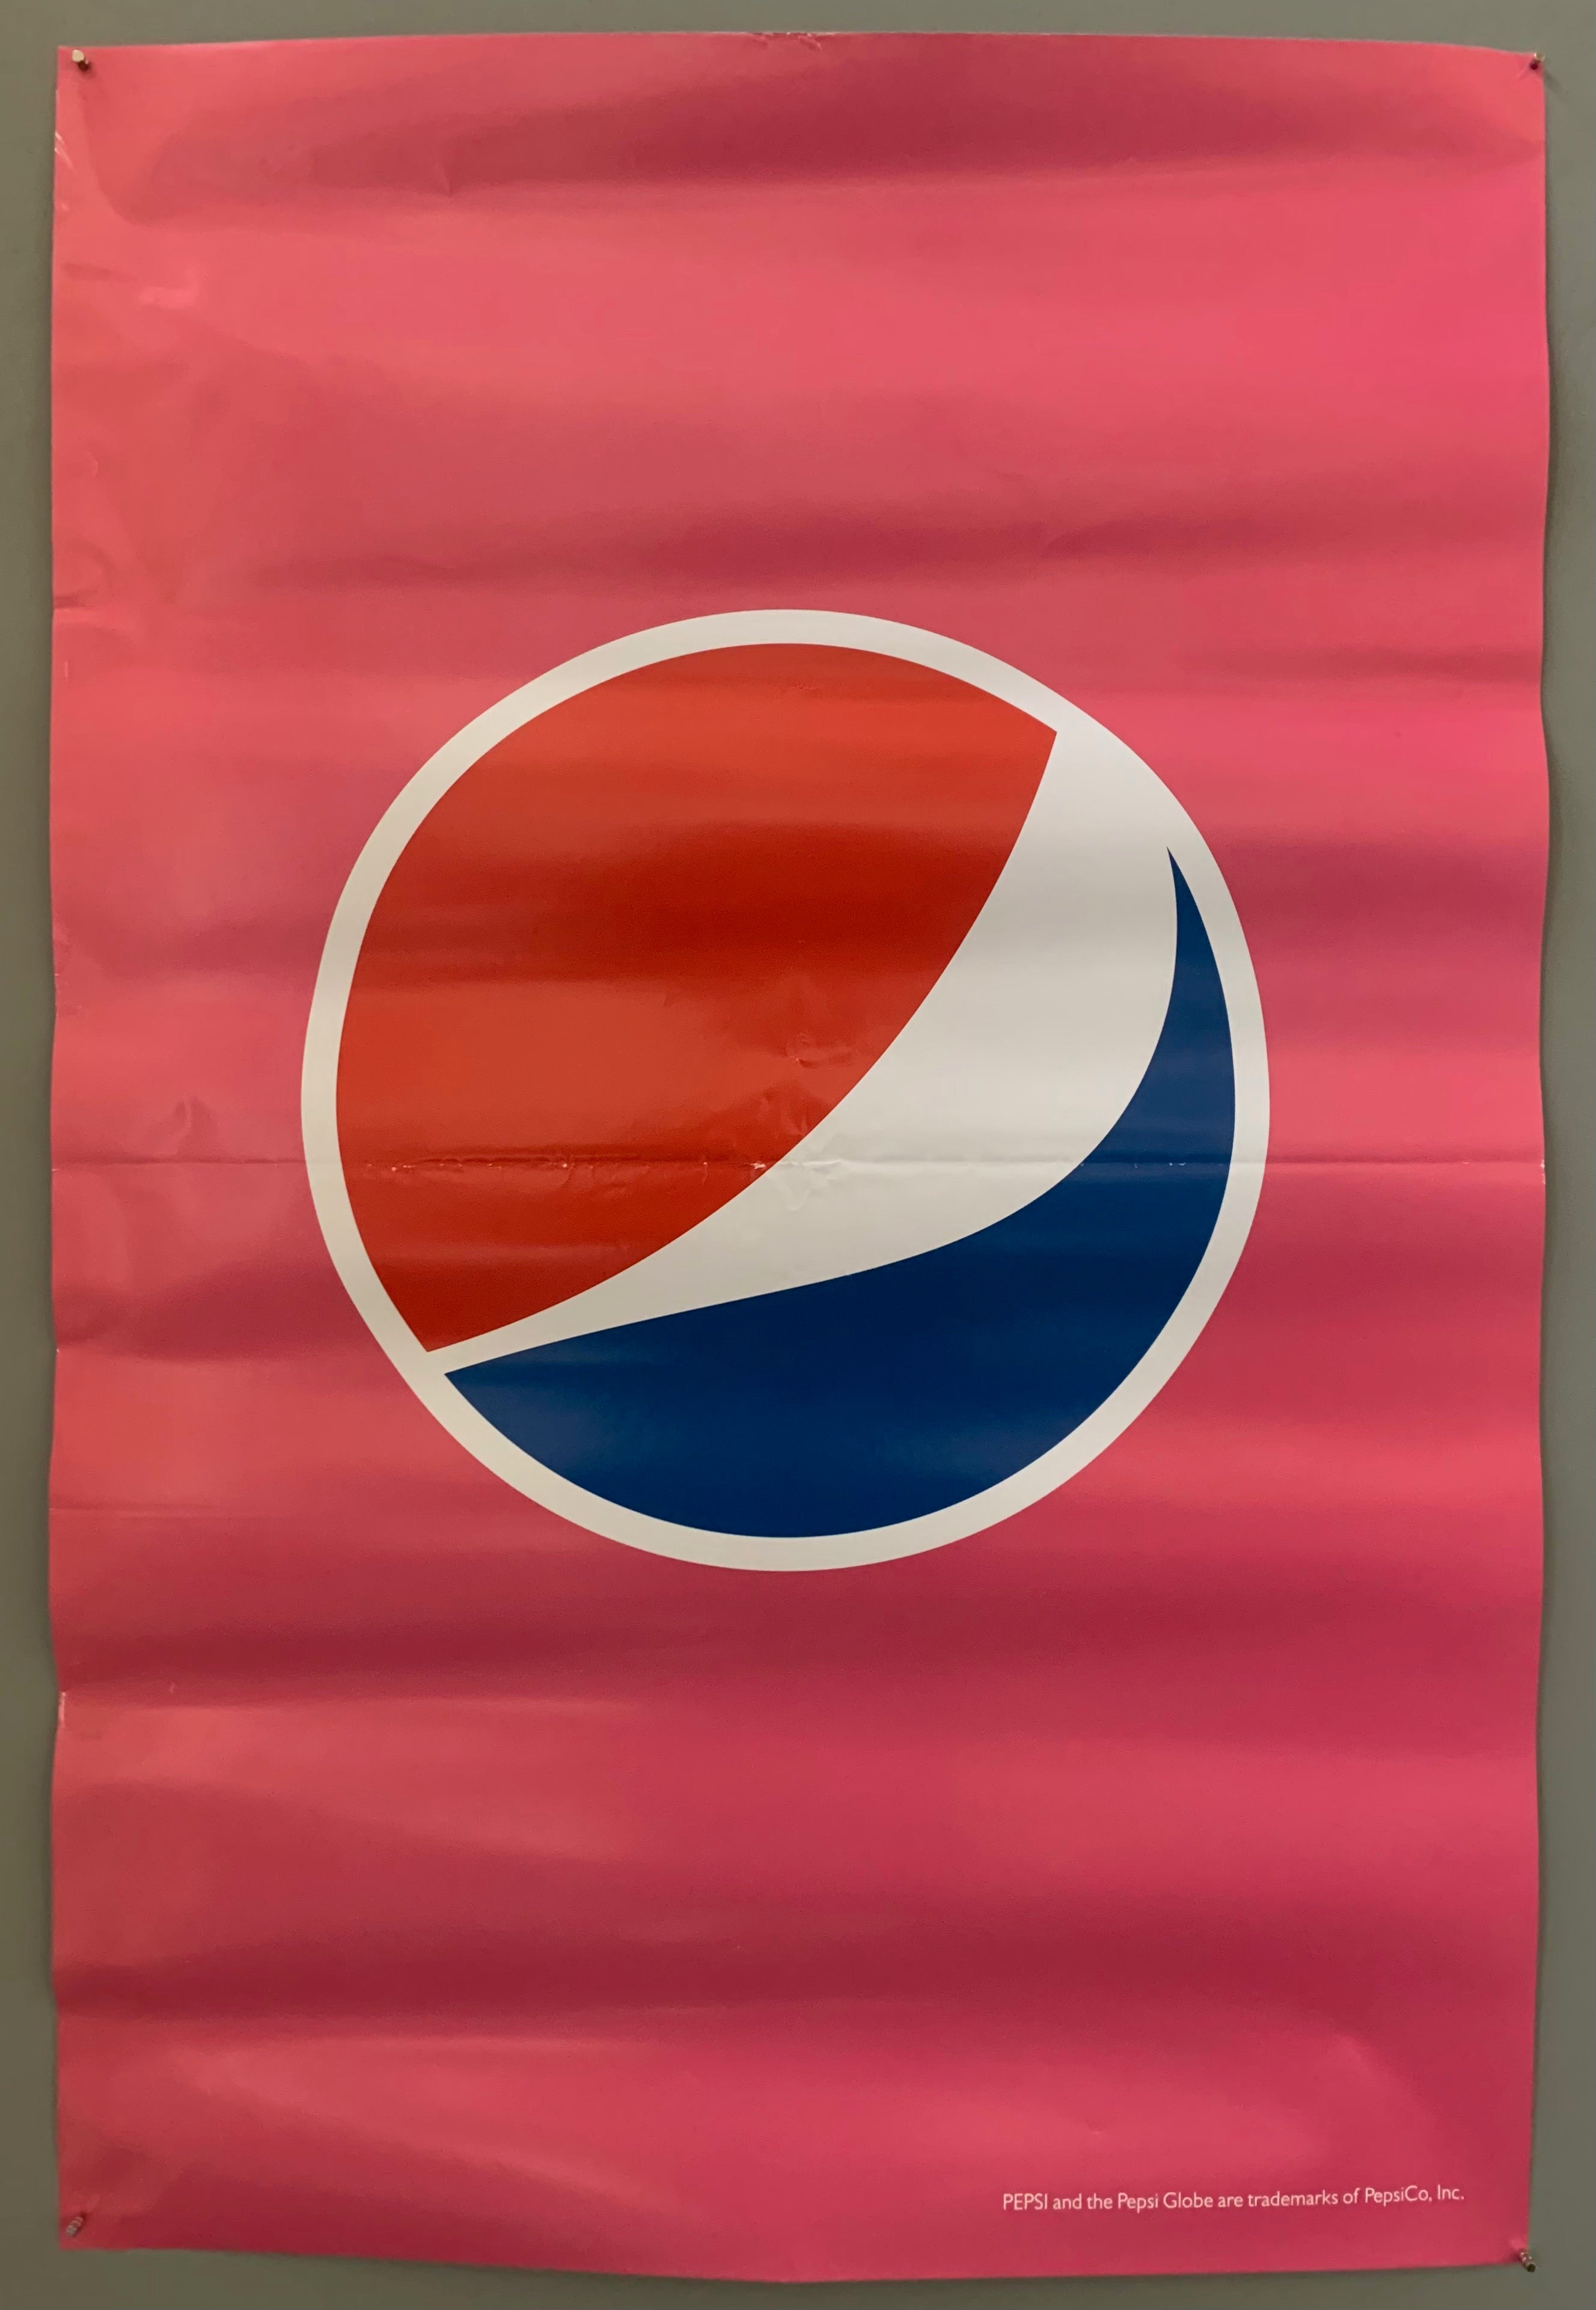 pepsi logo on a pink background